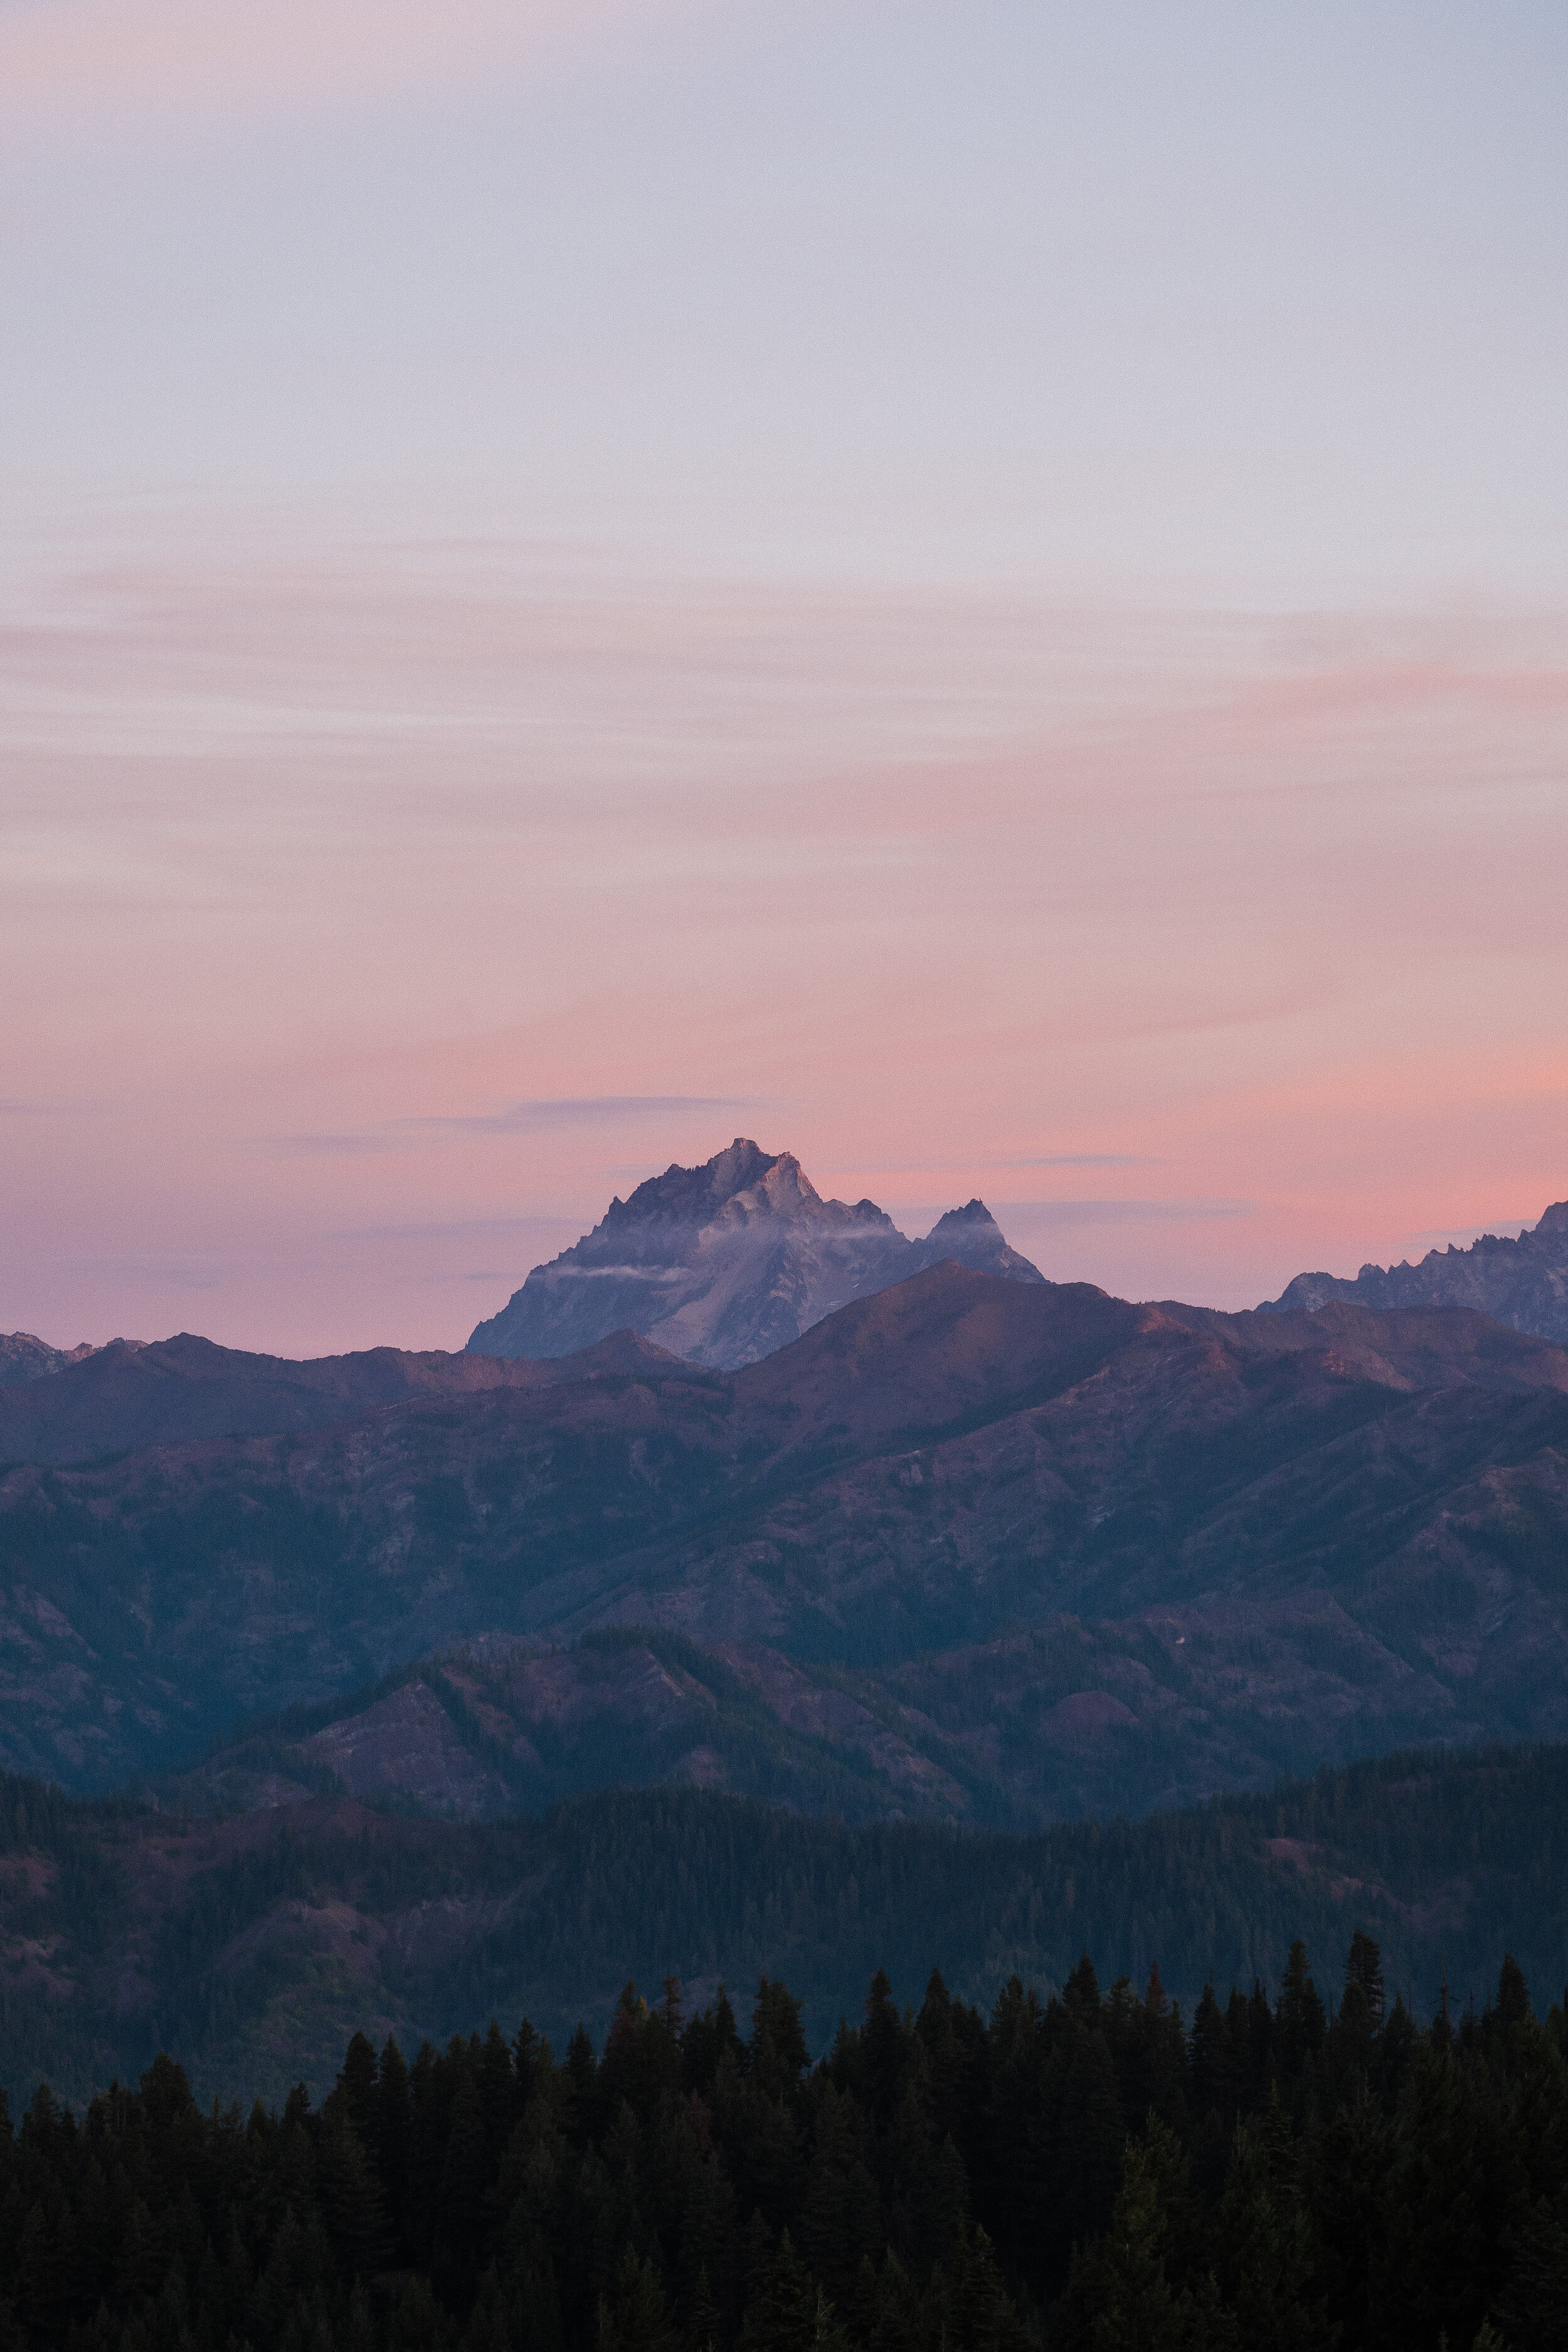 Sunrise Mountain Engagement Photos in the Central Cascades